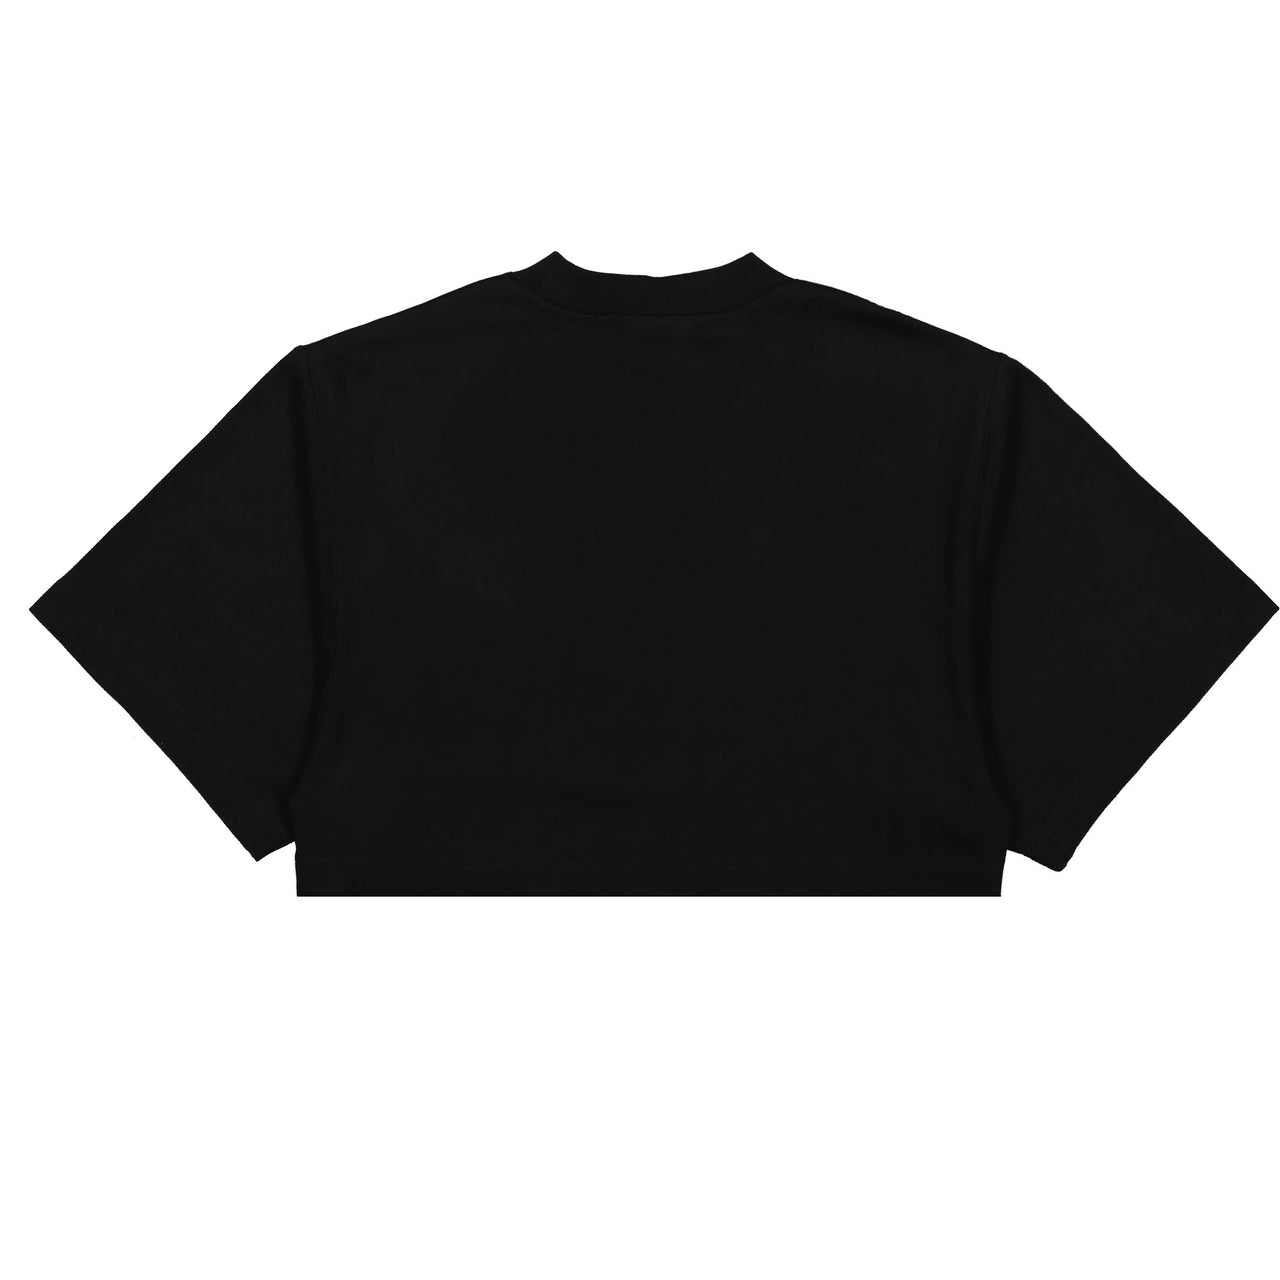 VTMNTS Paris Embroidered Cropped T-Shirt